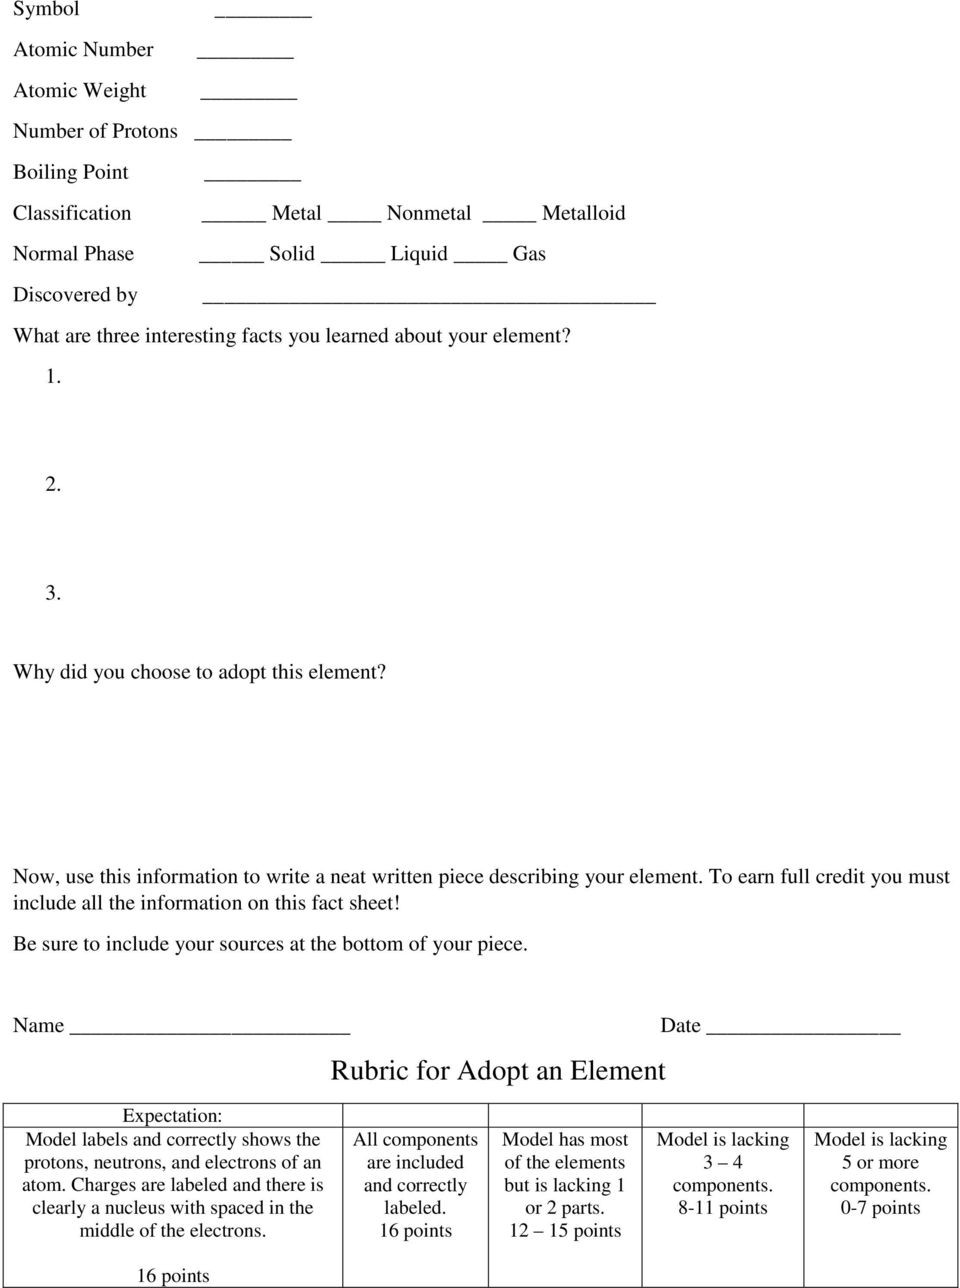 Nova Hunting the Elements Worksheet atoms and Elements [6th Grade] Pdf Free Download